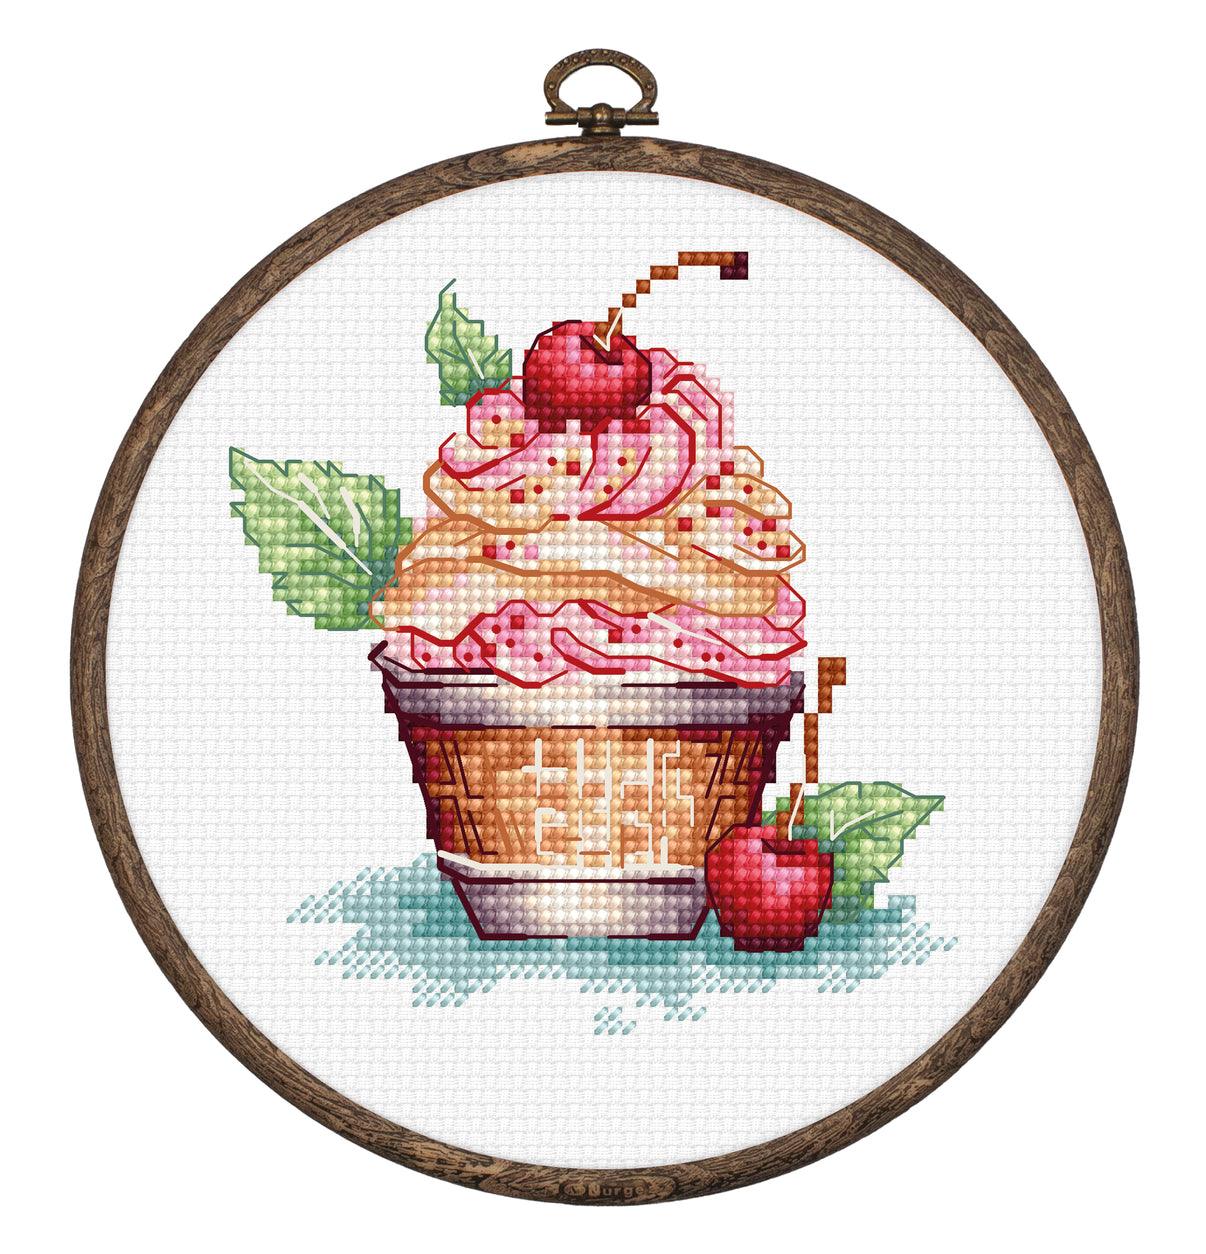 Cross Stitch Kit with Hoop Included Luca-S - Cherry Ice Cream, BC104 - Luca-S Cross Stitch Kits